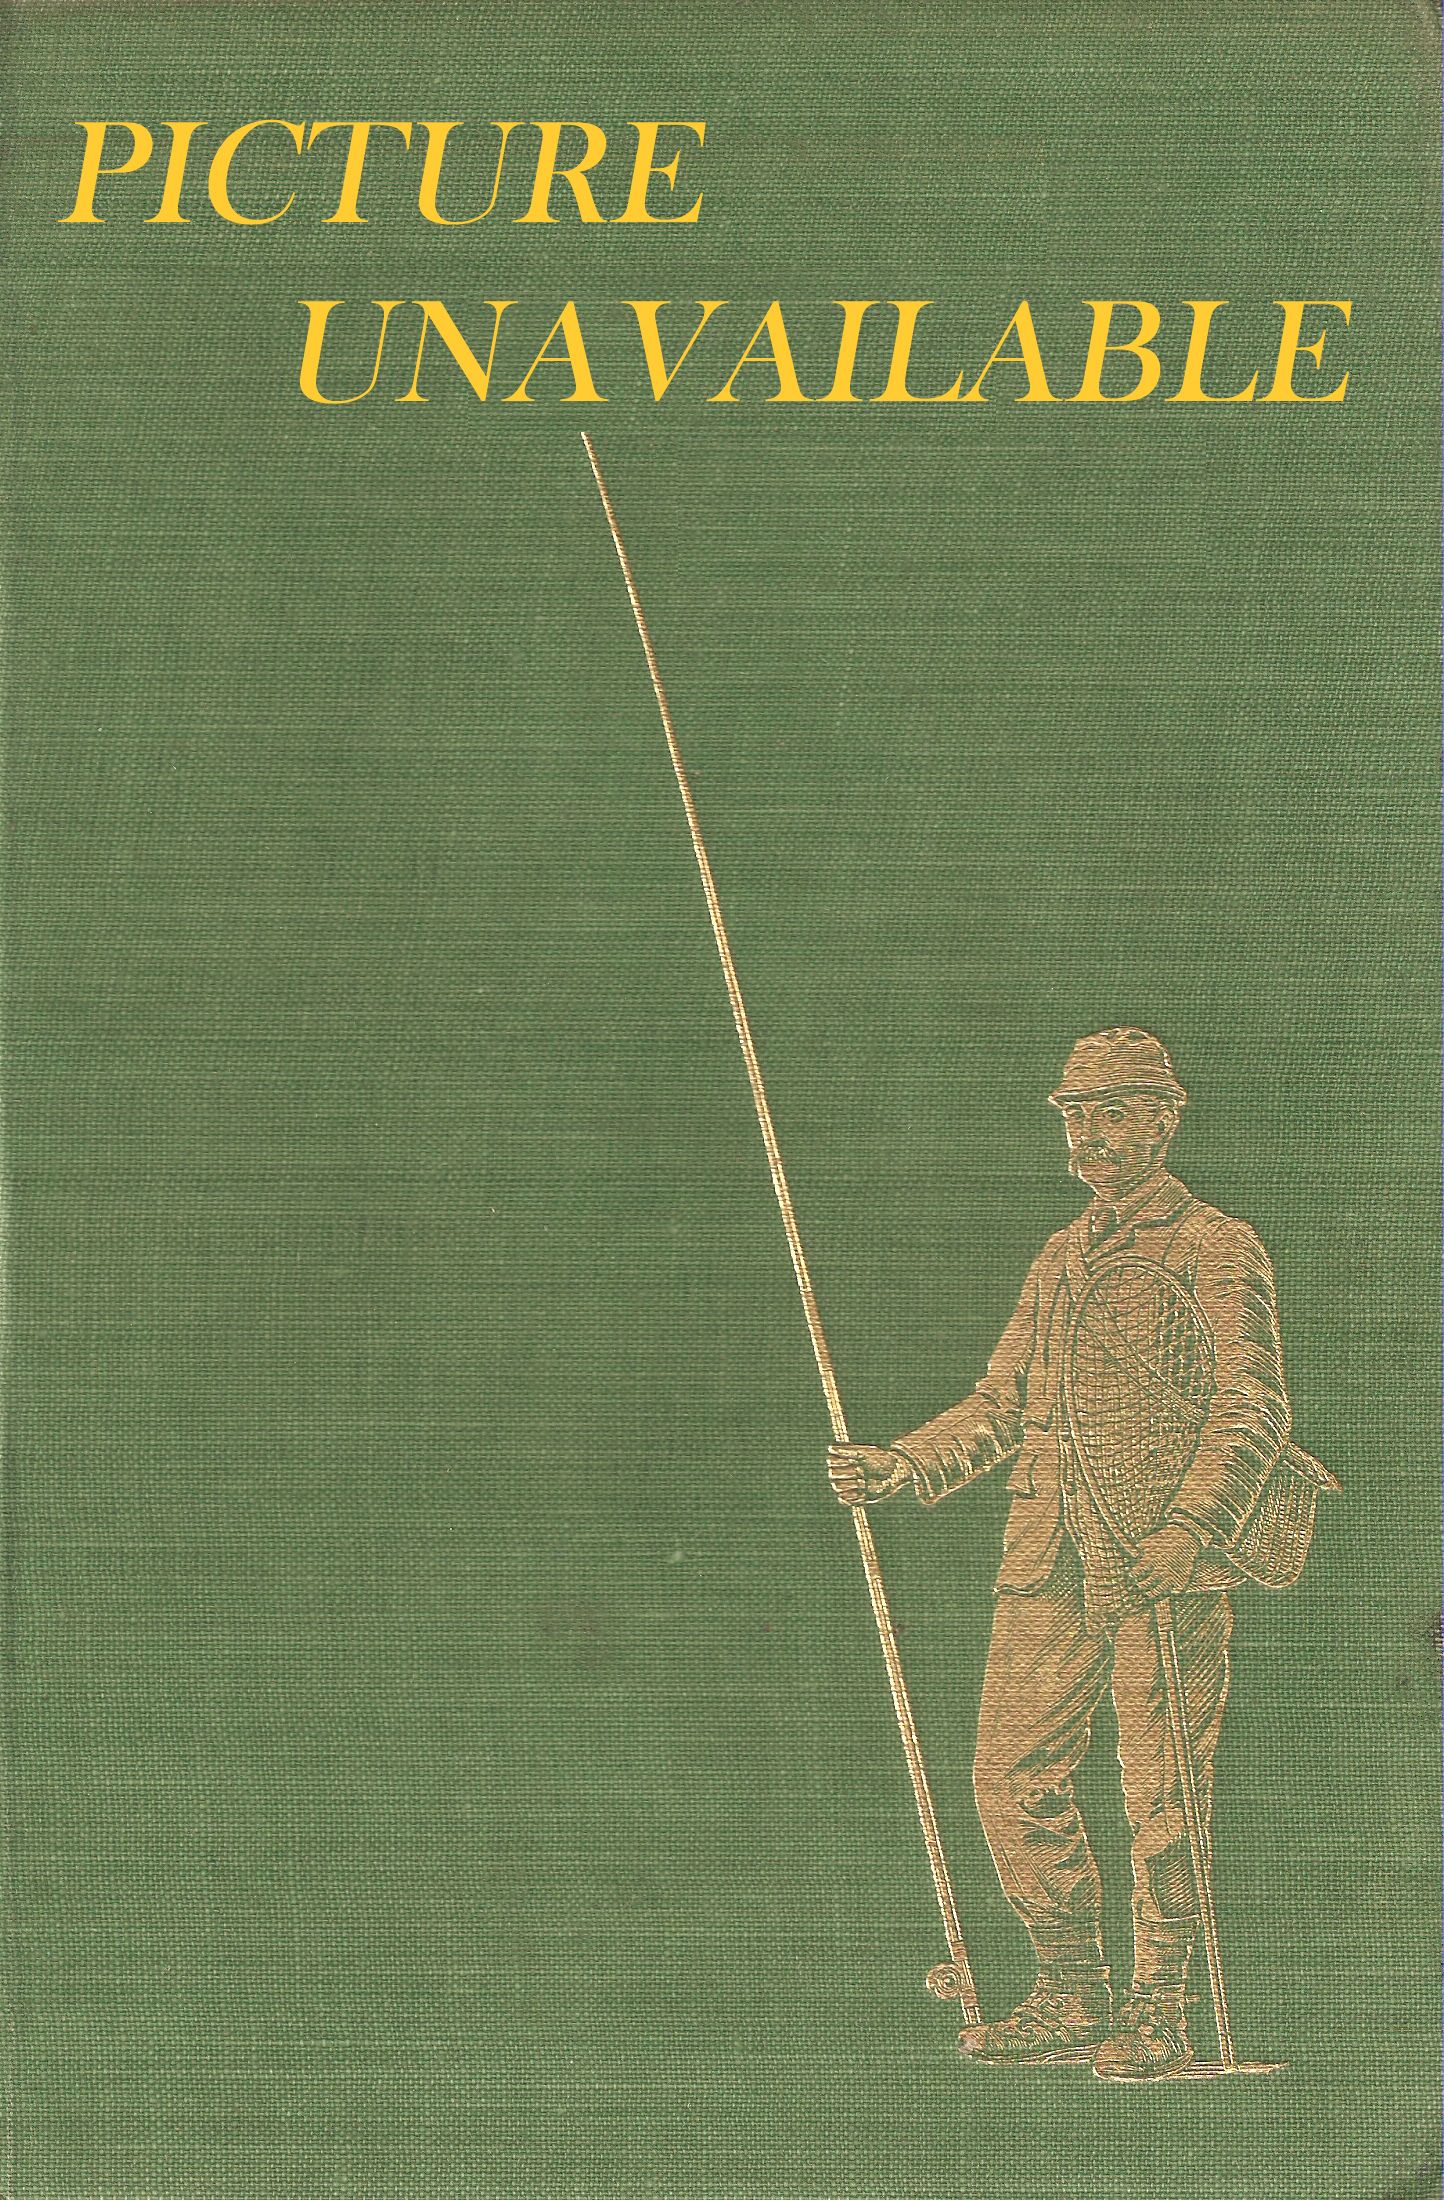 A HUMBLE FISHERMAN. BEING SIMPLE AUTOBIOGRAPHIC ESSAYS ON THE ART, CRAFT  AND PHILOSOPHY OF FISHING. By Morley Roberts.